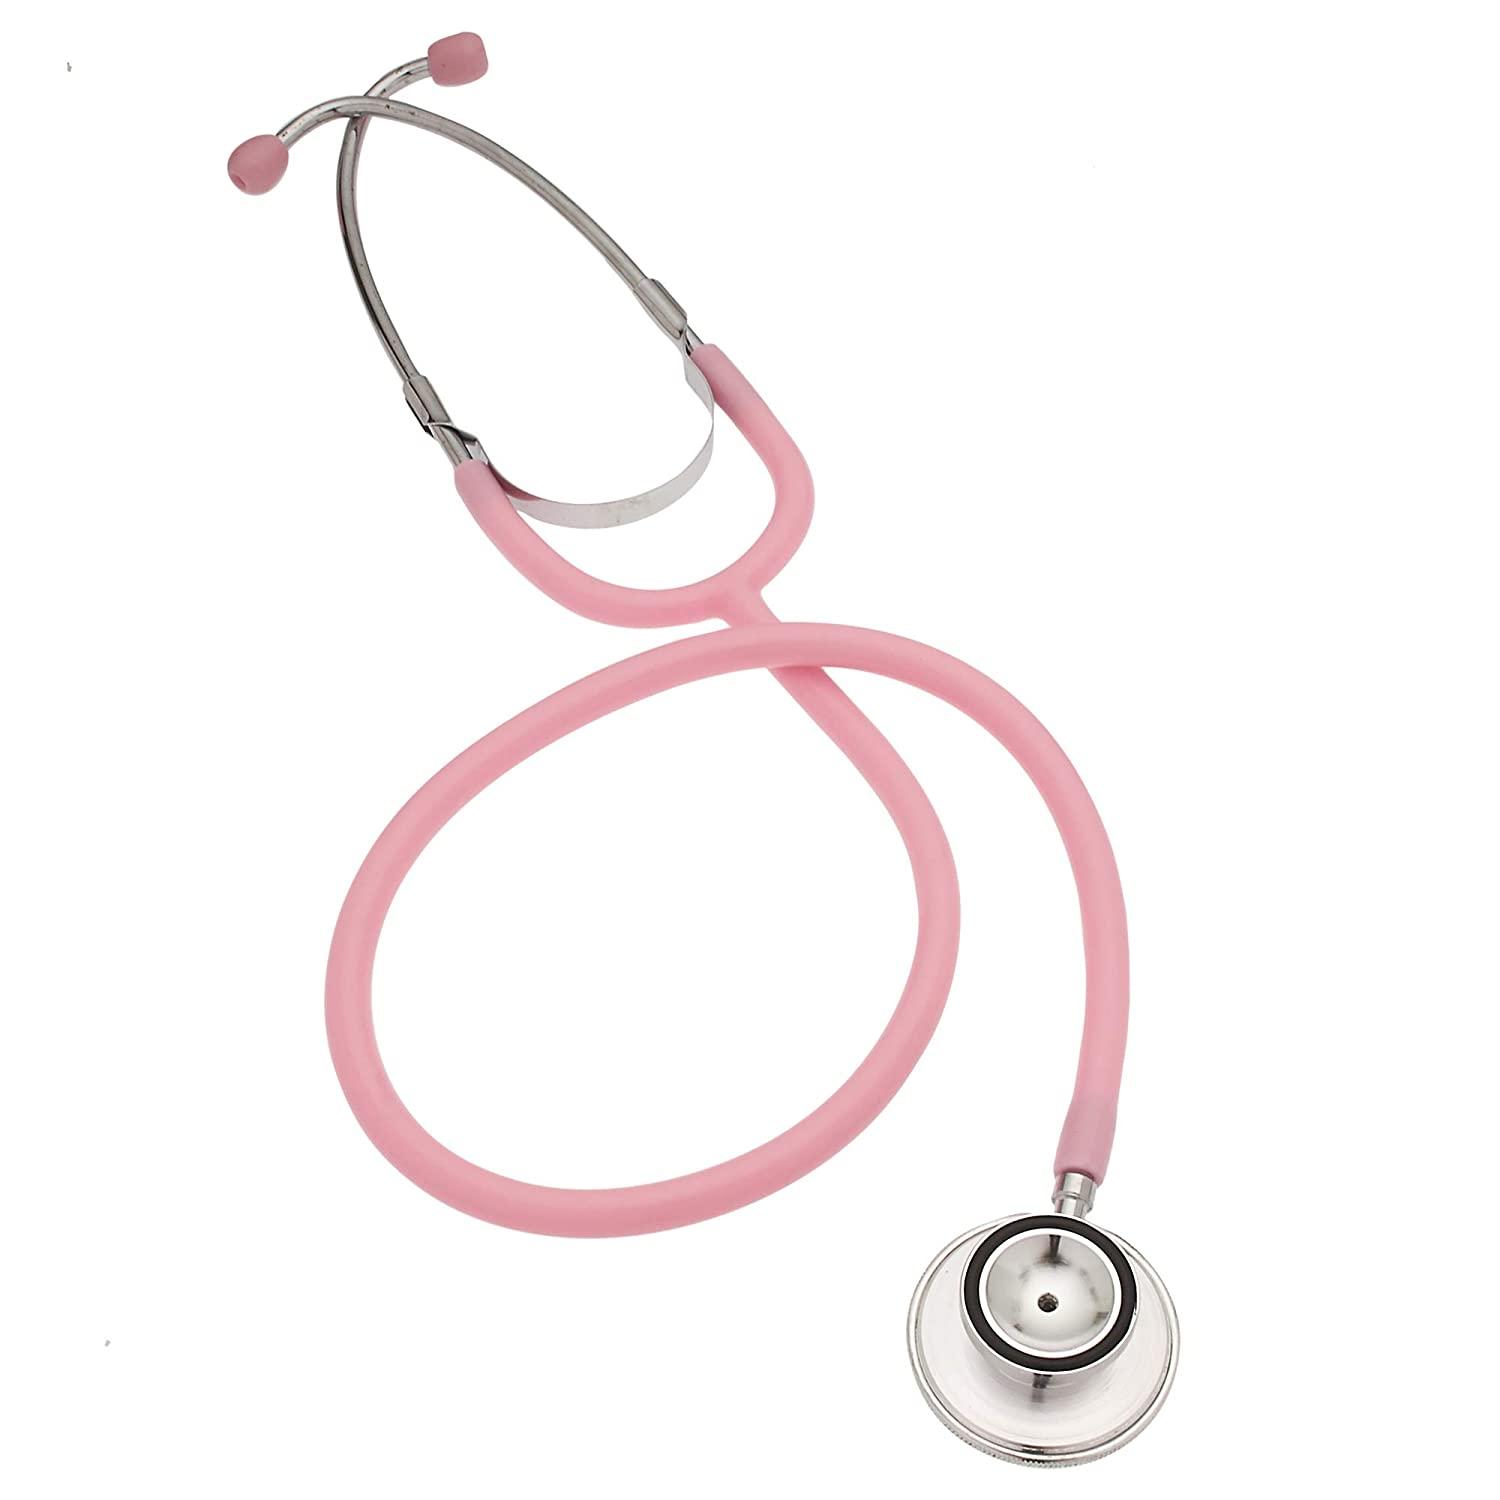 Classic Dual Head Stethoscope for Medical and Home use - Ideal for ...